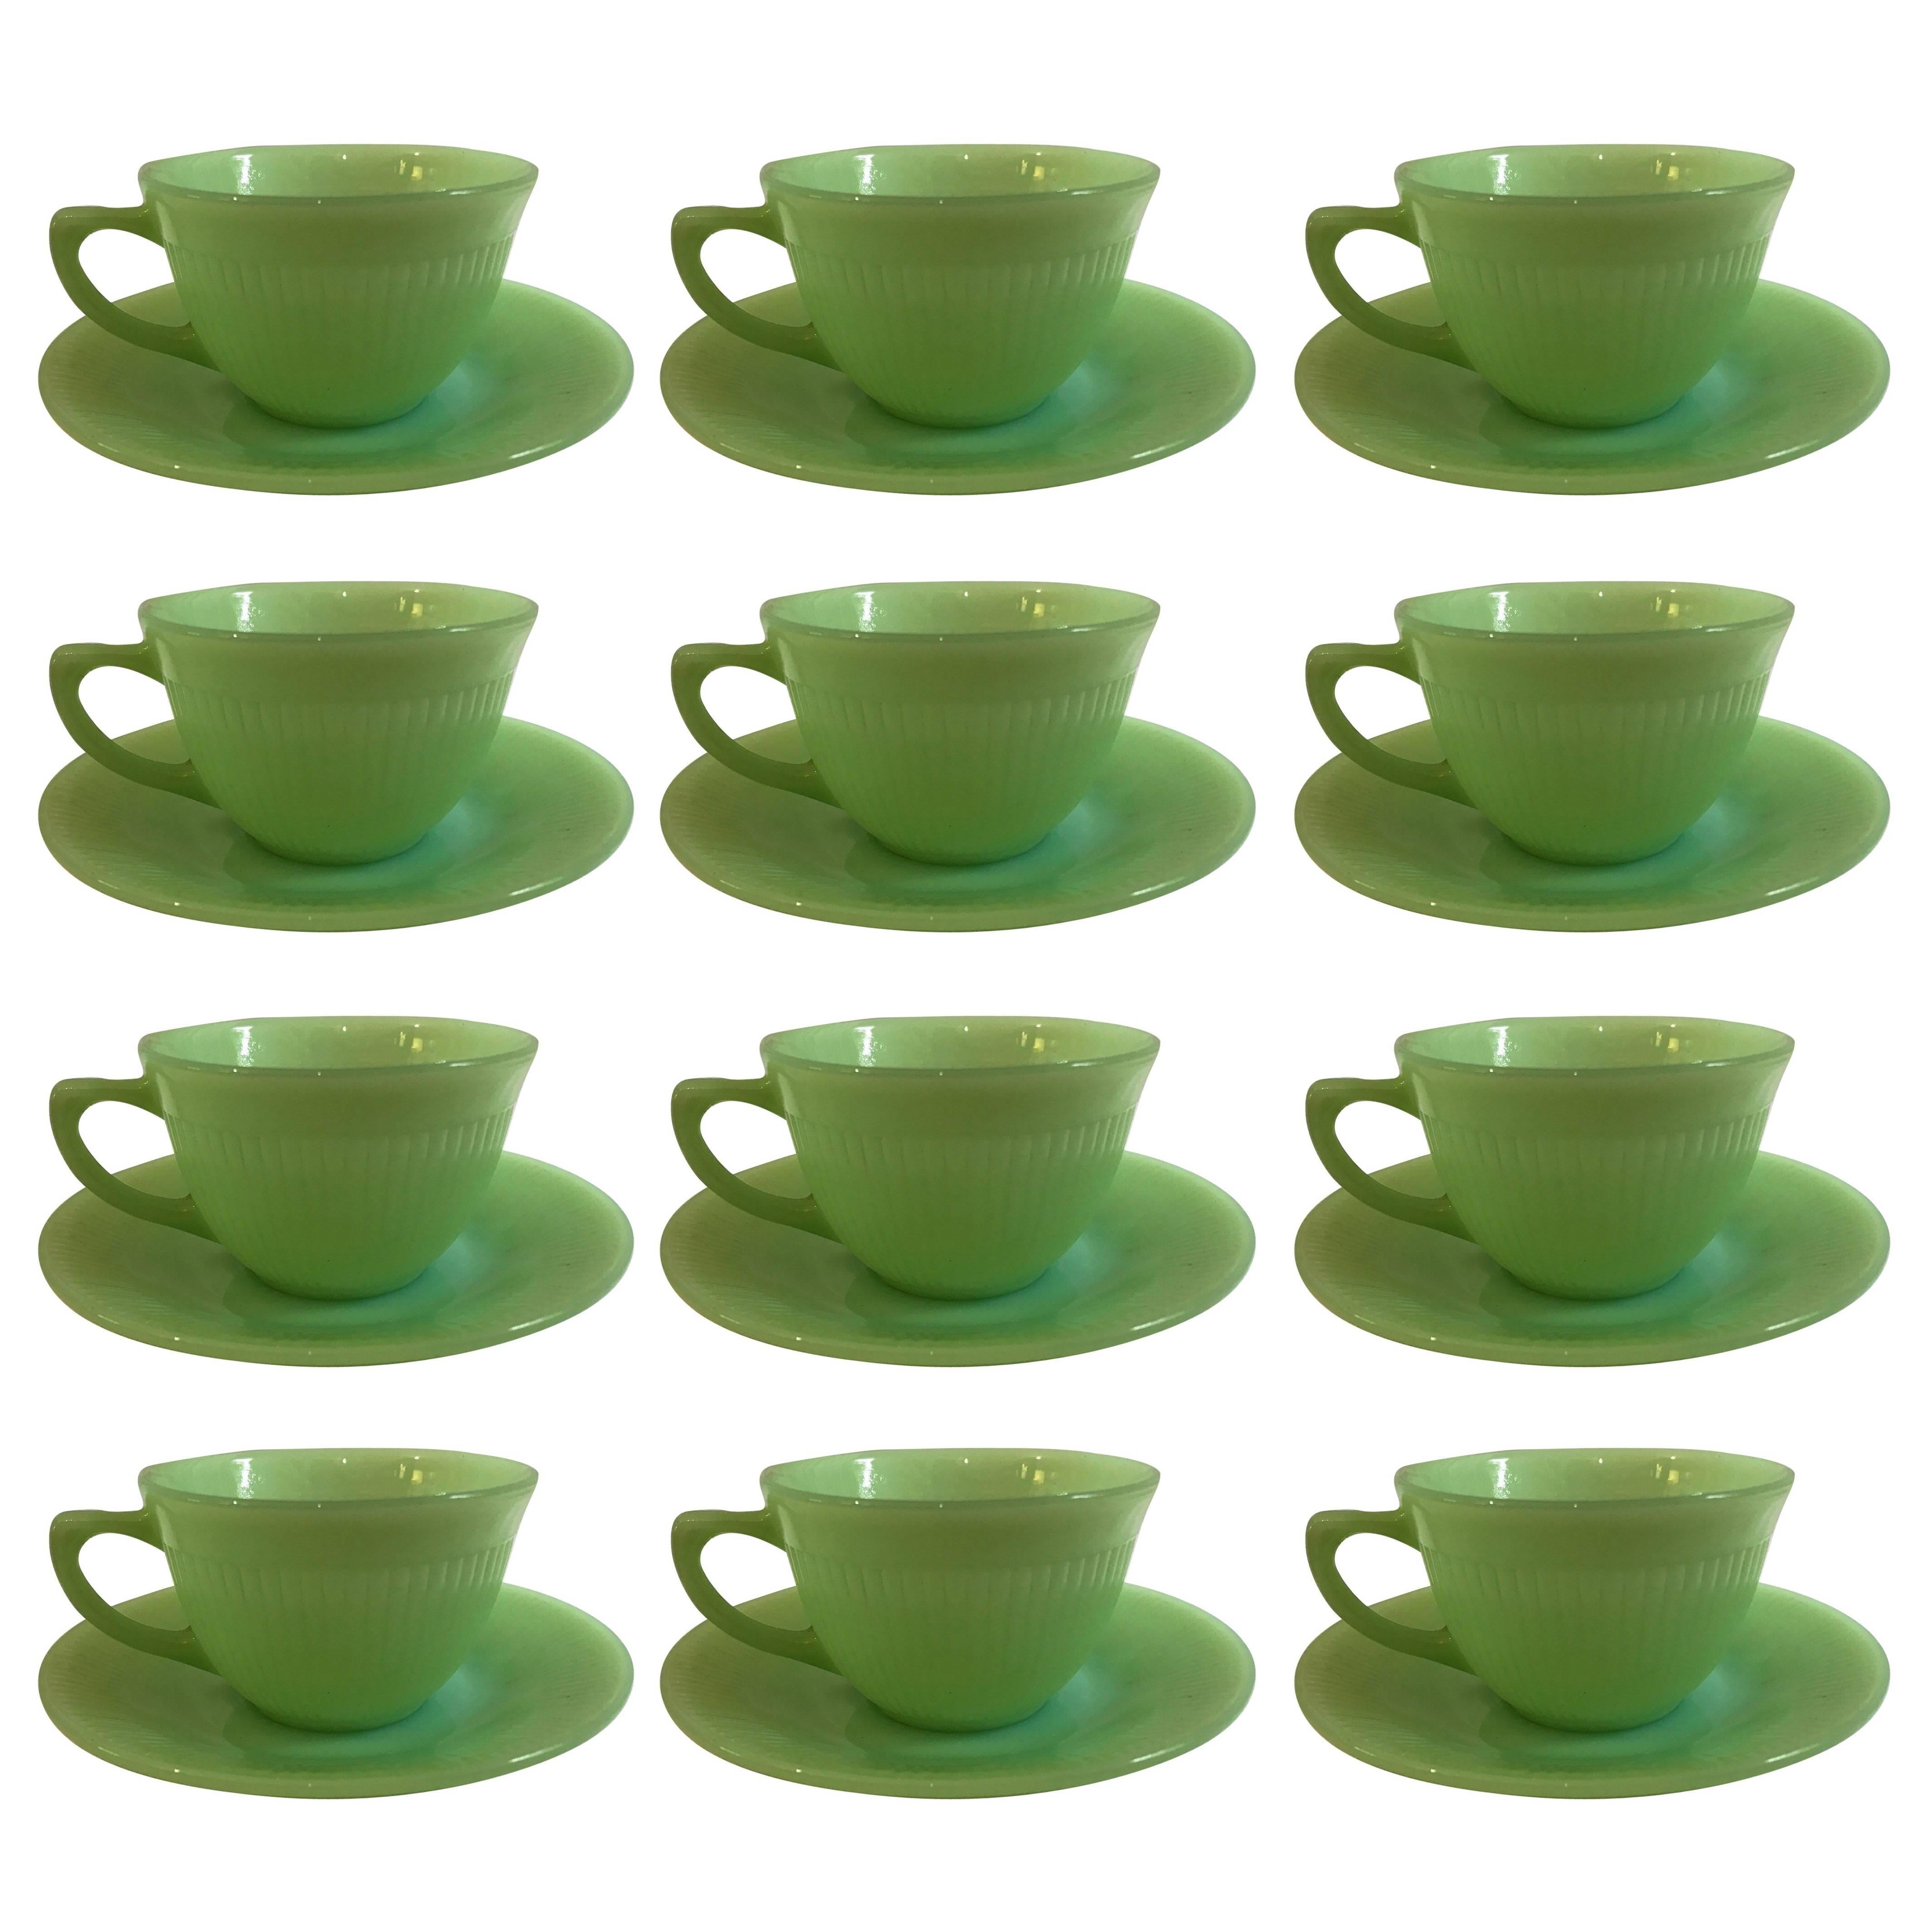 Terrific Set of Jadeite - Fire King Anchor Hocking 12 Cup 14 Saucer Set Magnific